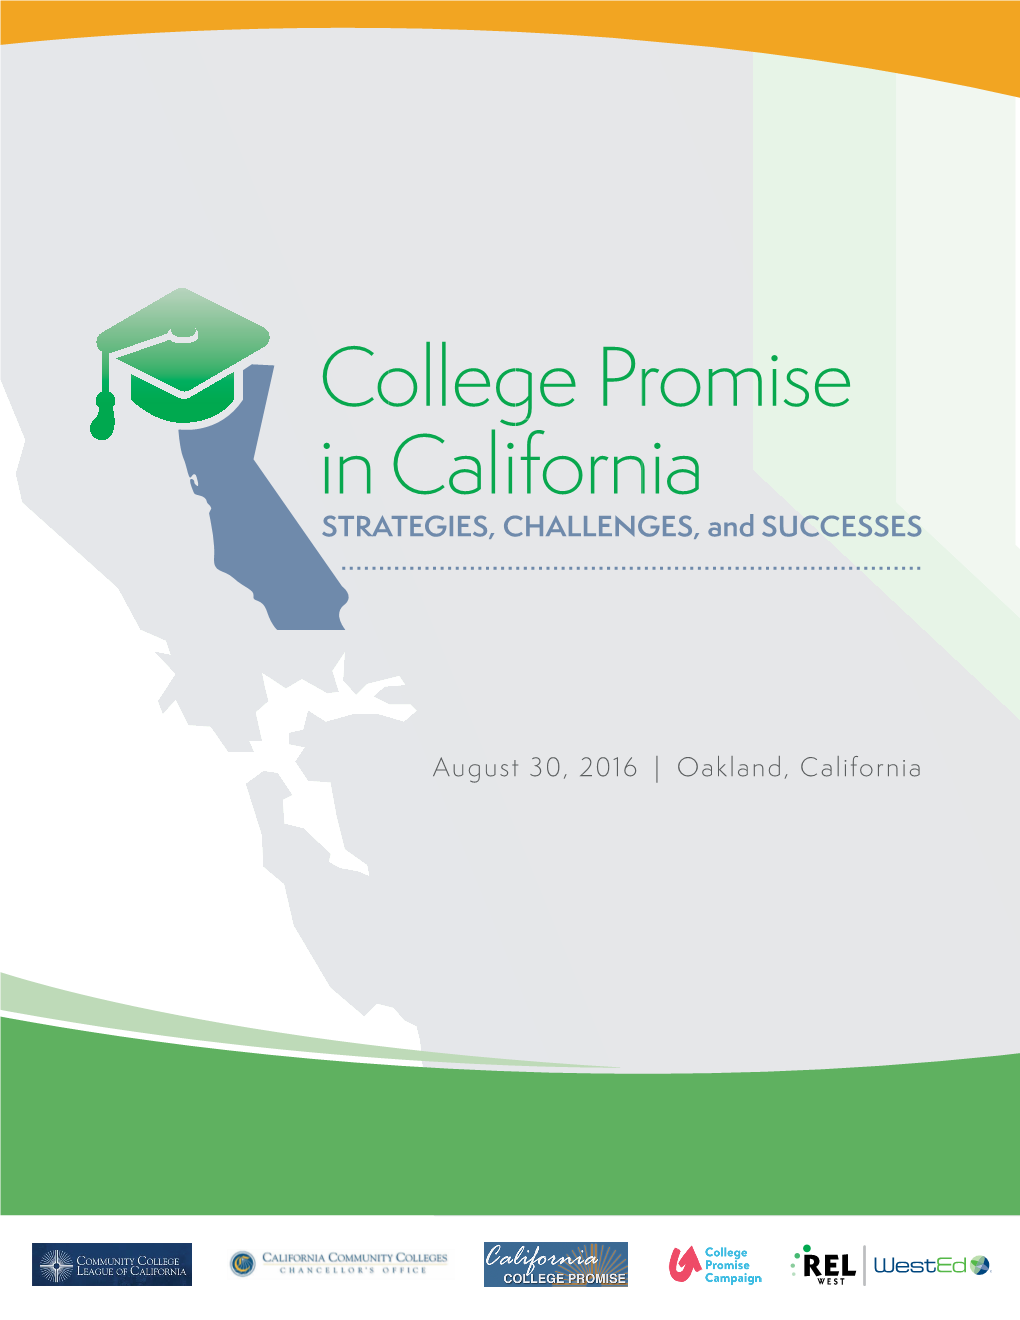 College Promise in California: Strategies, Challenges, and Successes!